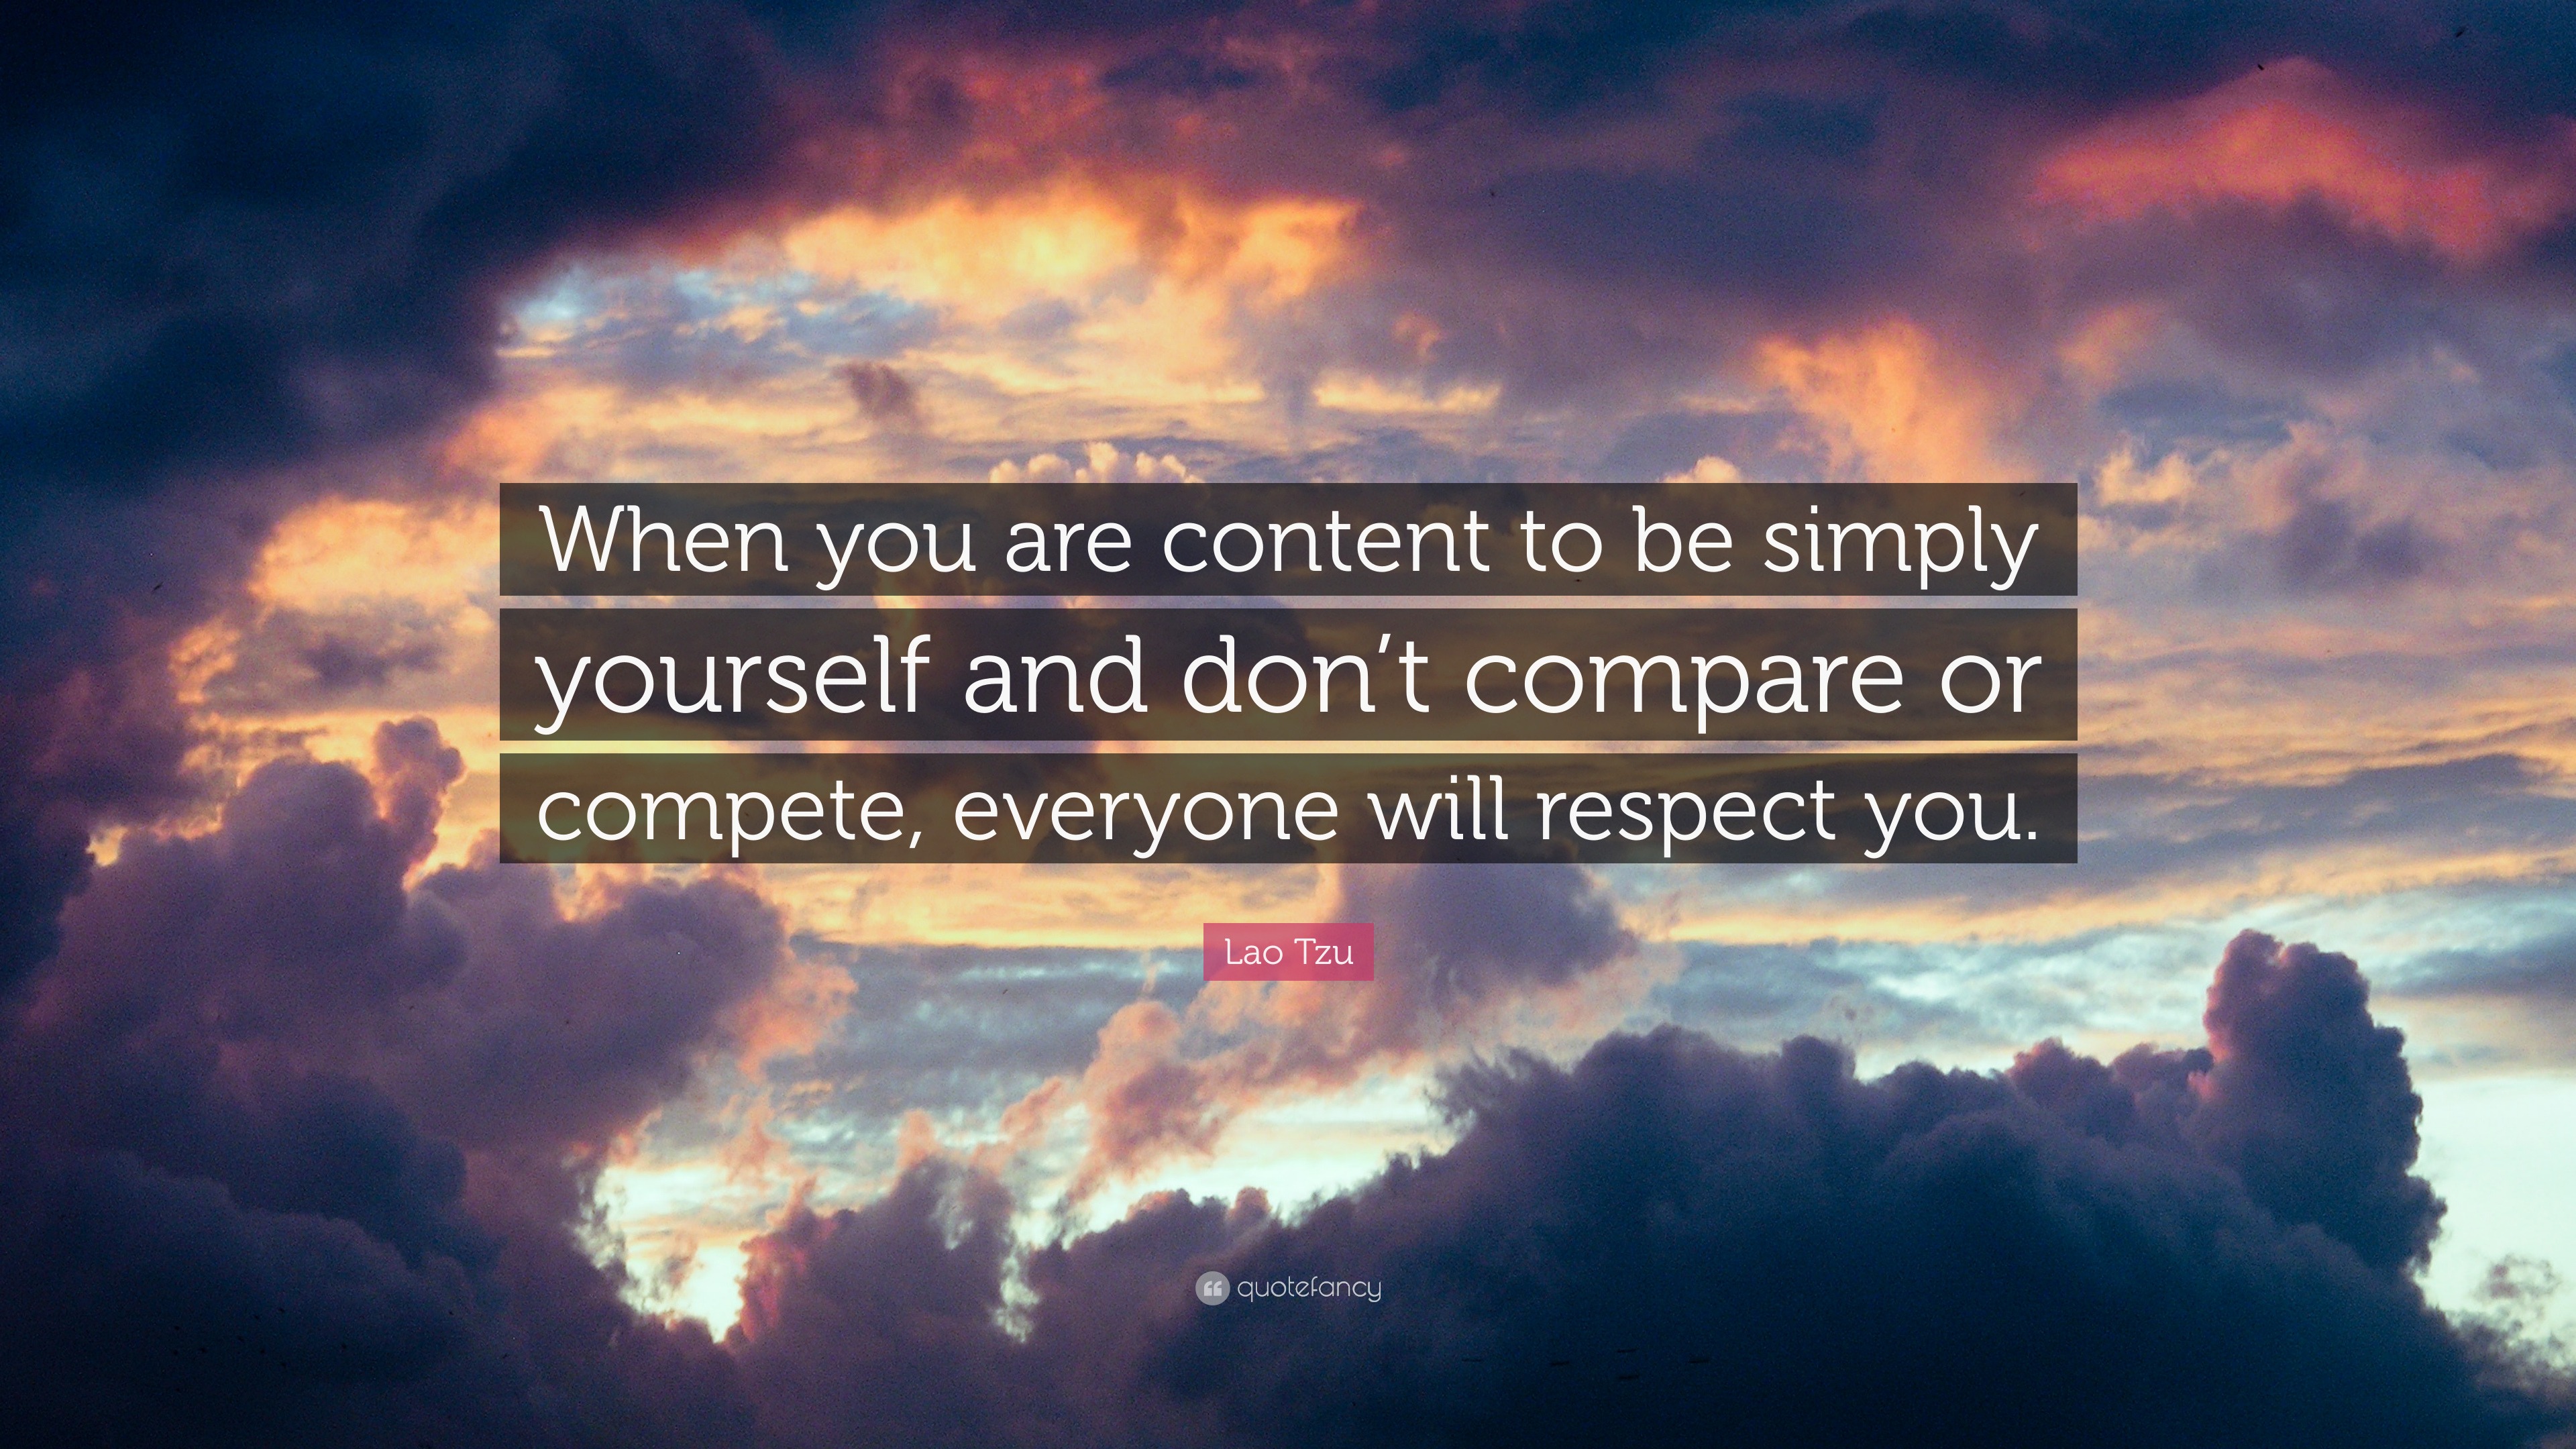 content with simply being.